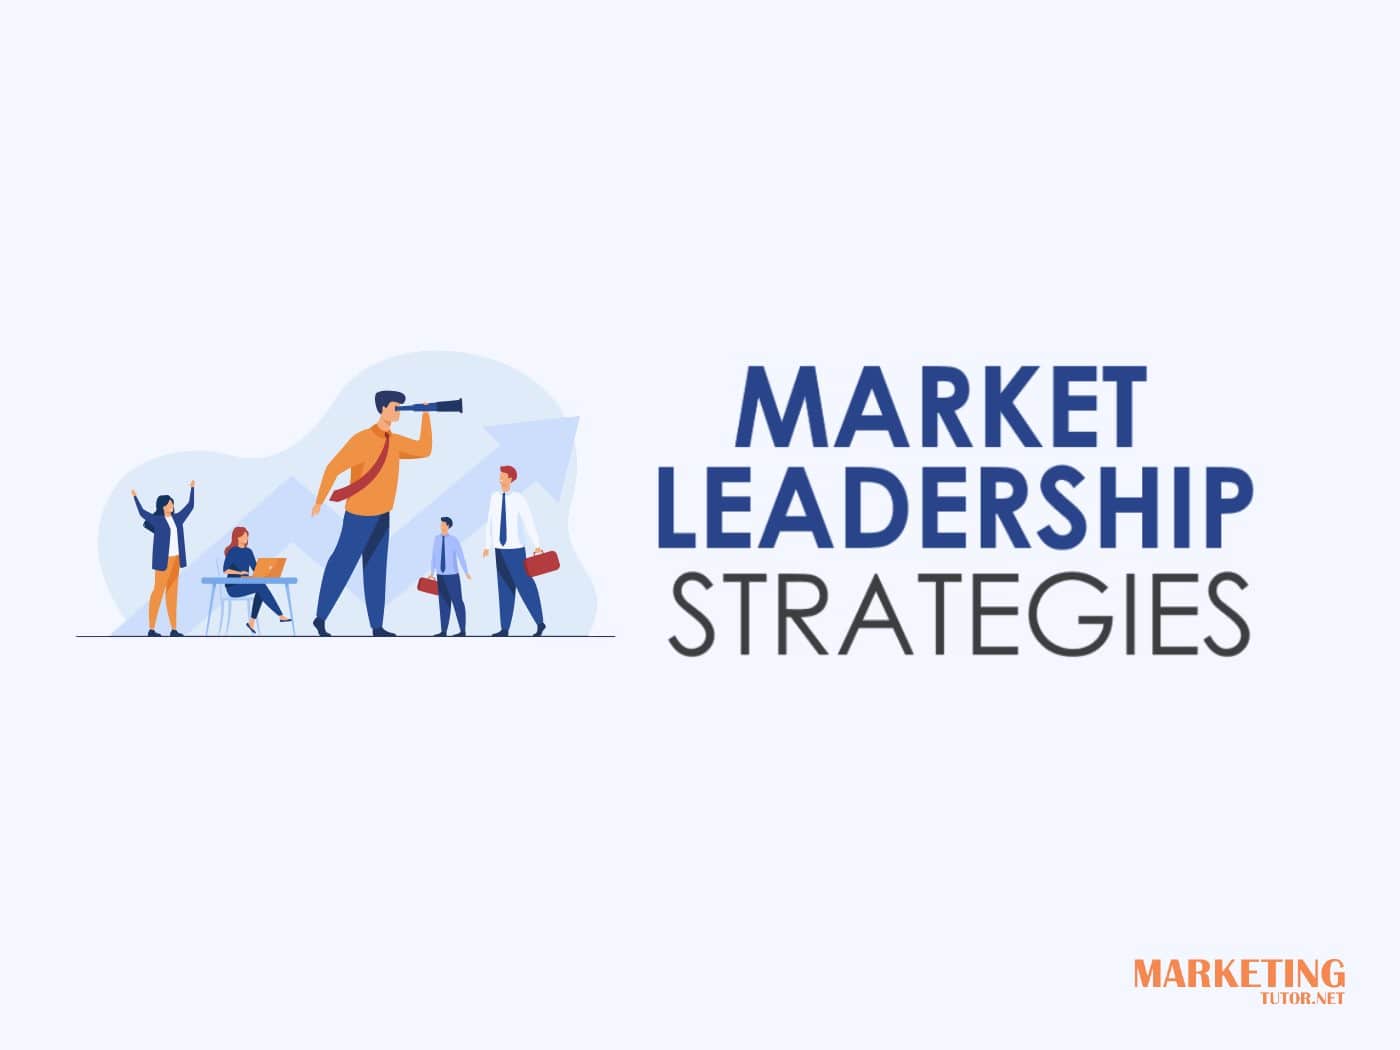 Strategy 2 Understanding Flanking Defense Strategy For Corporate Leaders  Strategy To Attain Market